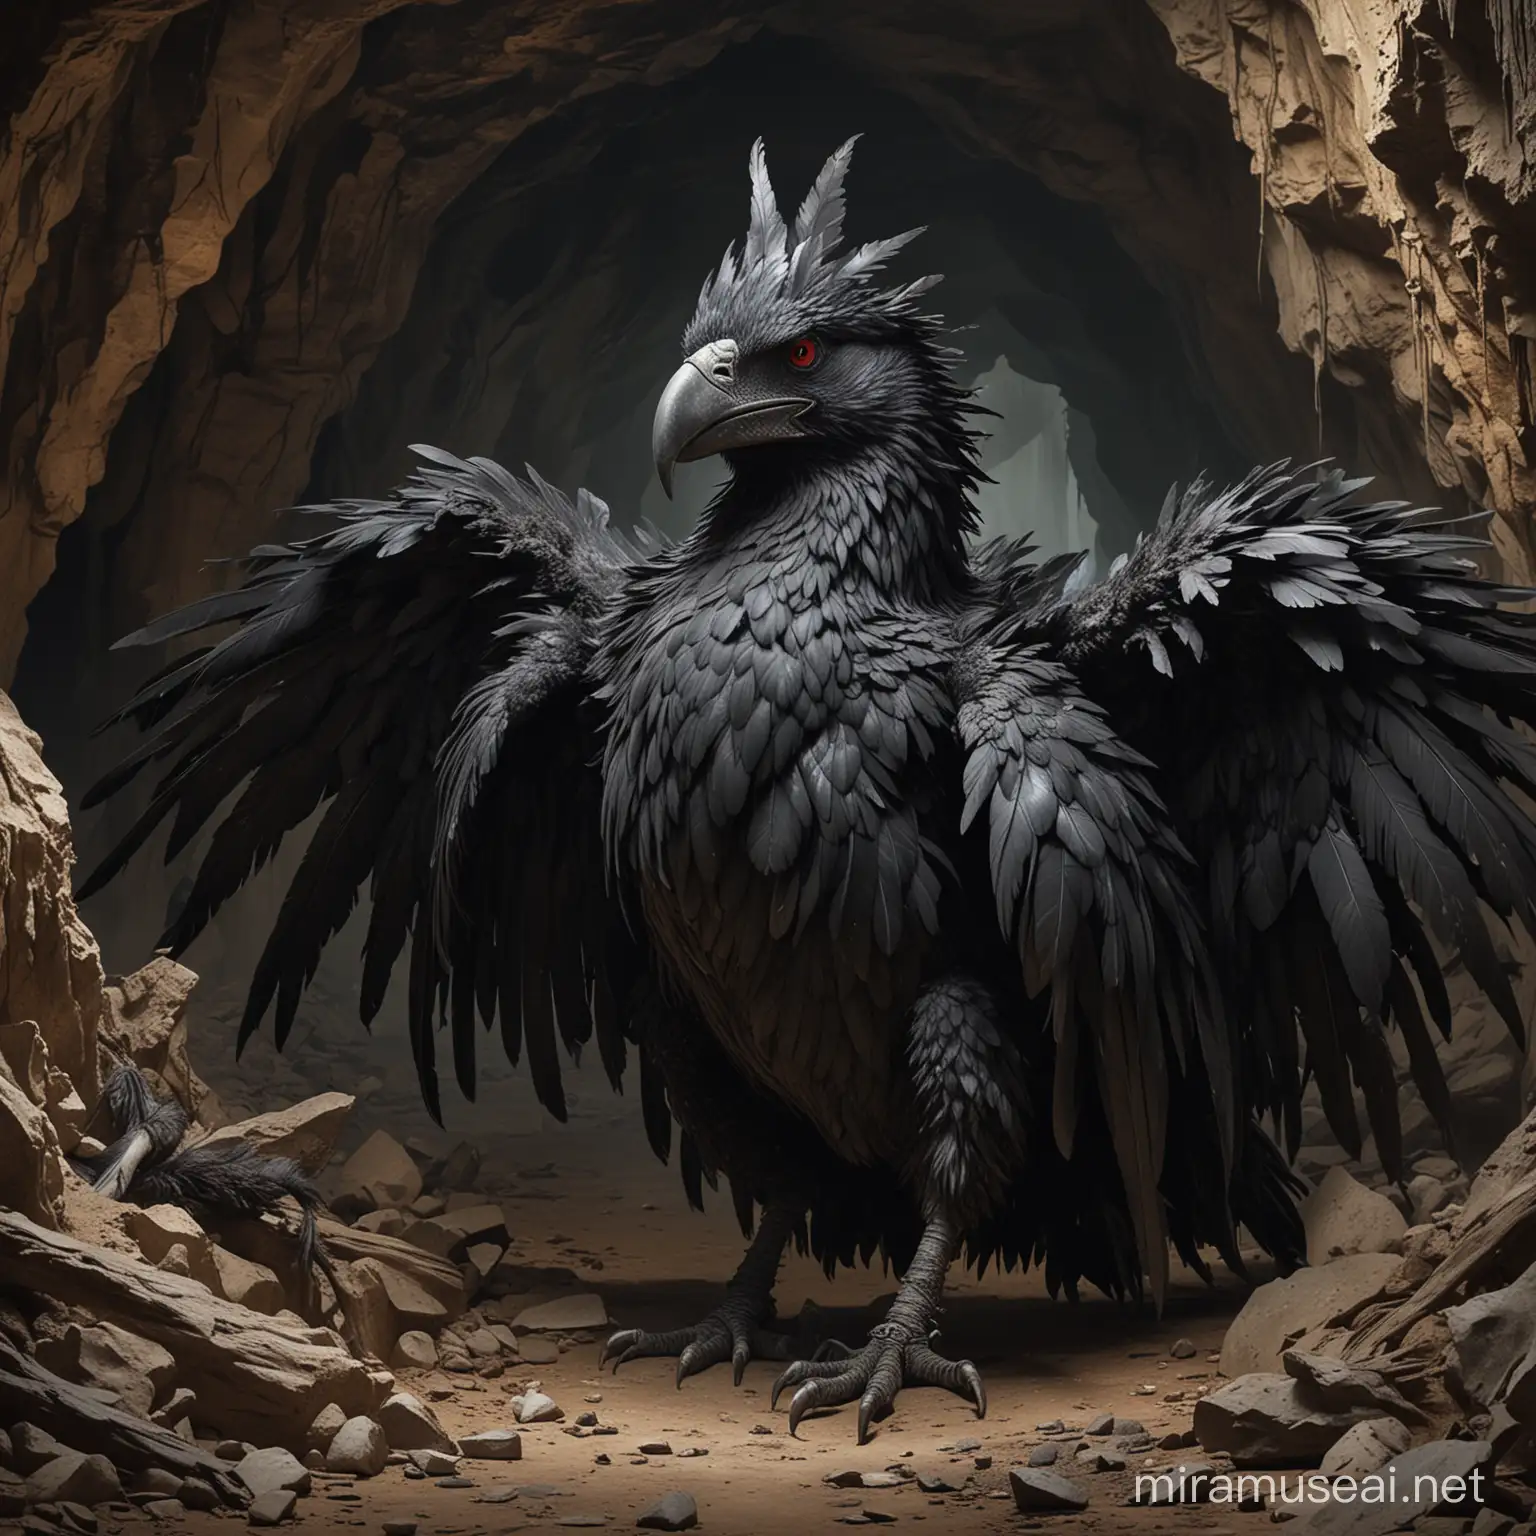 A giant creature with a hunched back, a disheveled mantle of messy black feathers, a terrifying beak, and mighty wings folded, hiding its gaunt body, with a vile soul filled with Corruption spreading outward from six grotesquely giant nodes, hiding in the darkness of a vast cavern